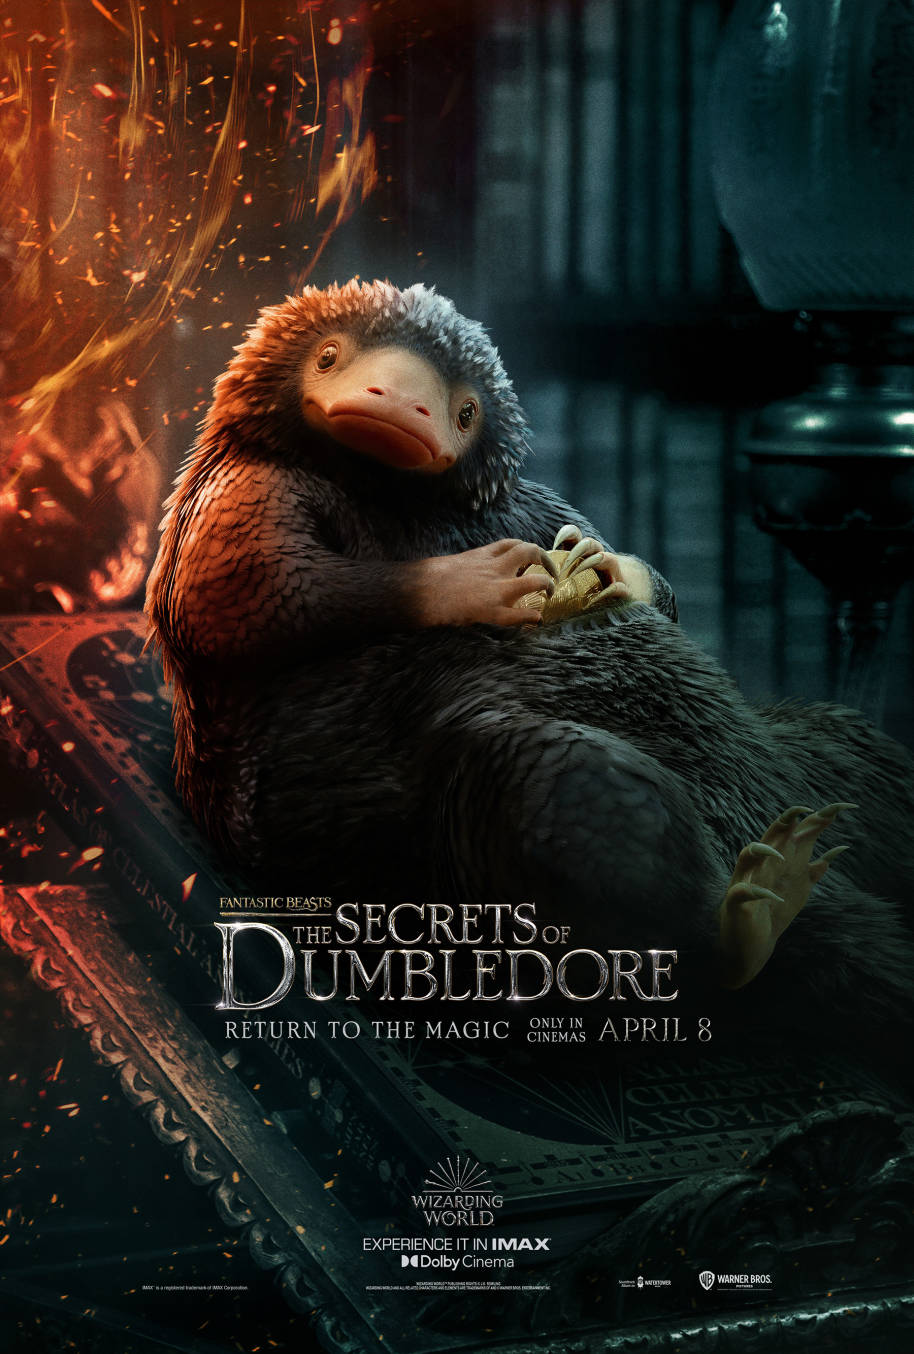 Teddy the Niffler in the poster for Fantastic Beasts: The Secrets of Dumbledore